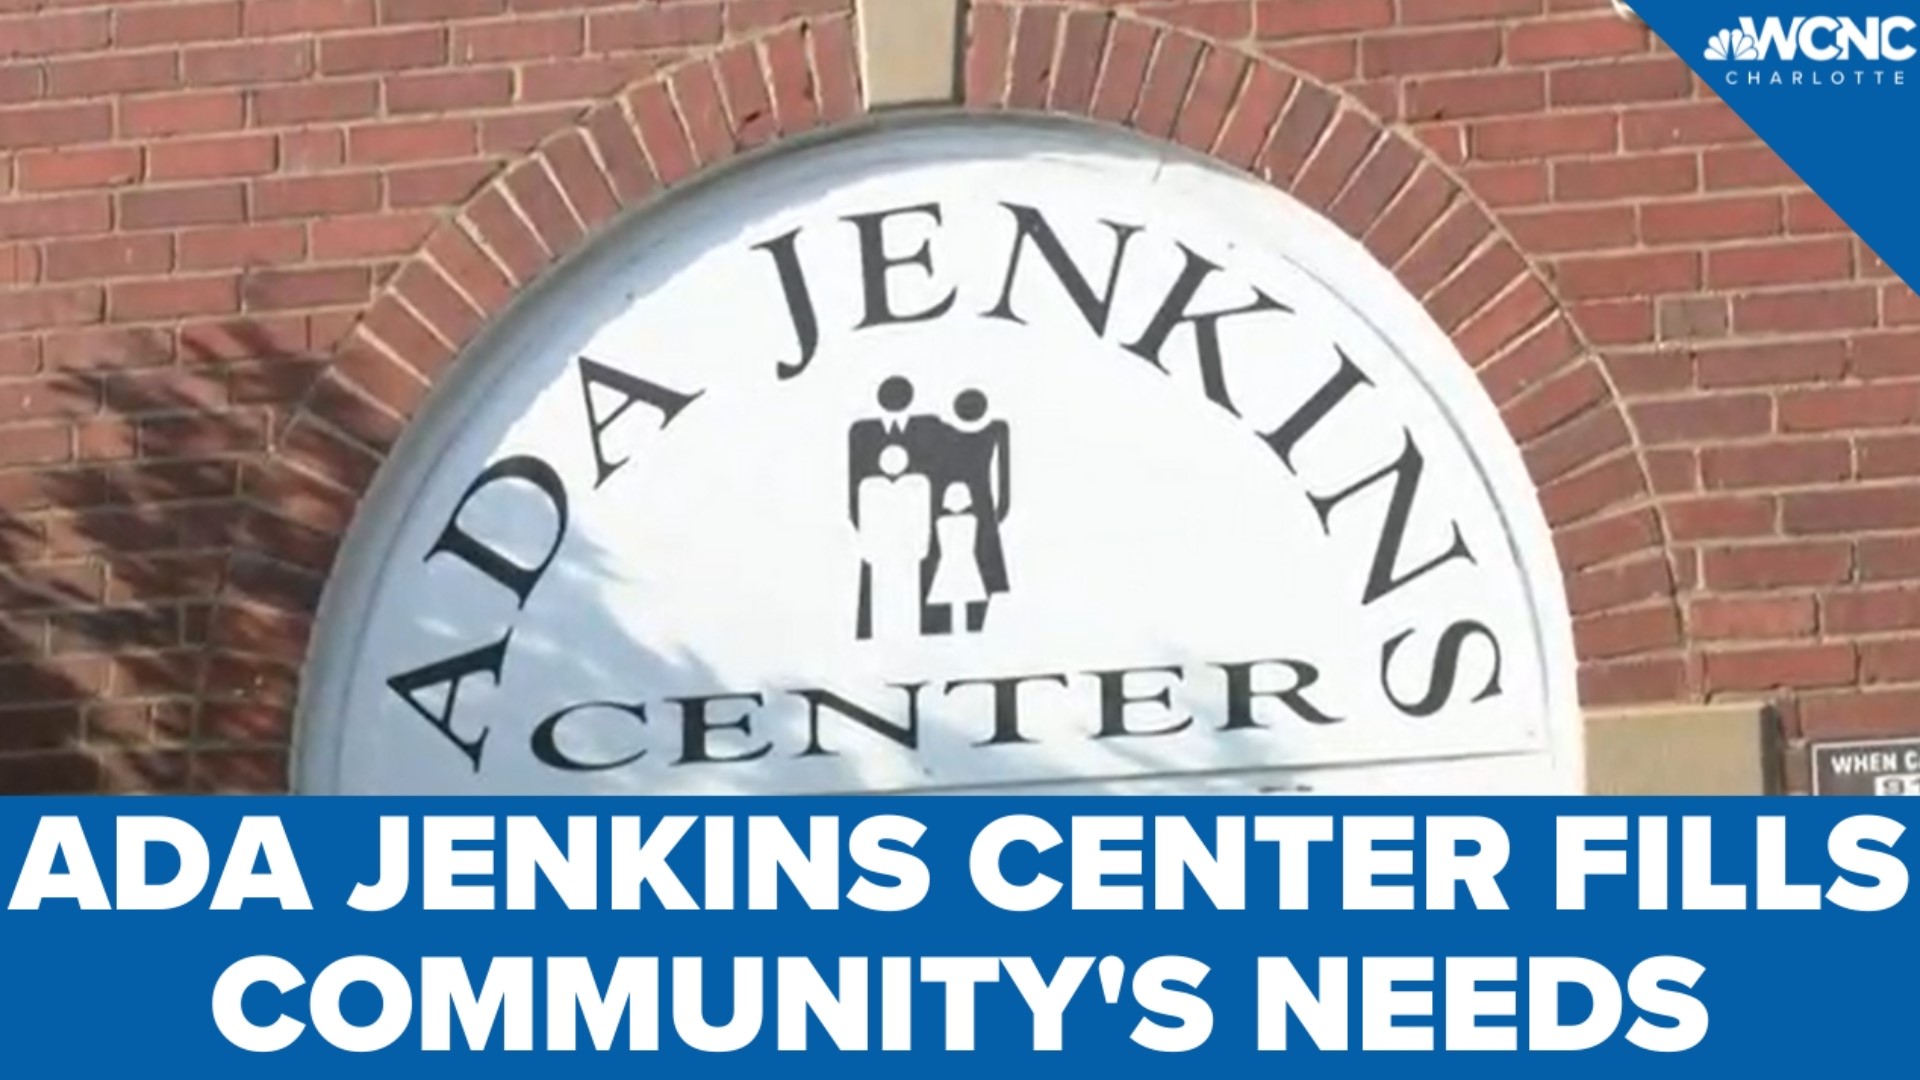 WCNC Charlotte spent all day at the Ada Jenkins Center in the heart of downtown Davidson.